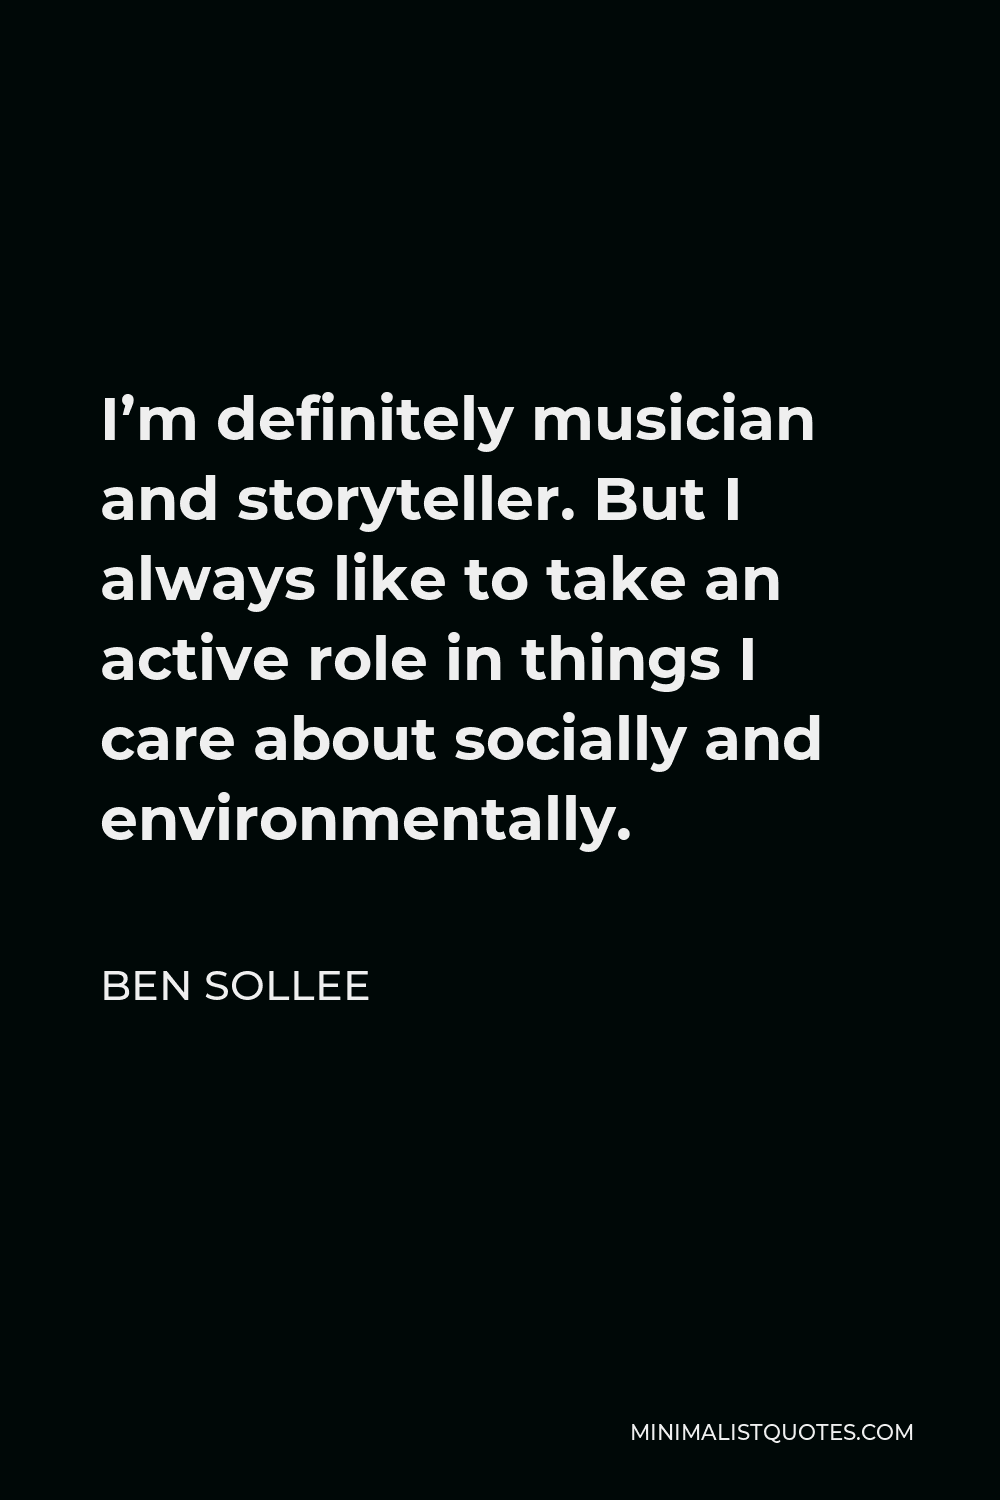 Ben Sollee Quote - I’m definitely musician and storyteller. But I always like to take an active role in things I care about socially and environmentally.